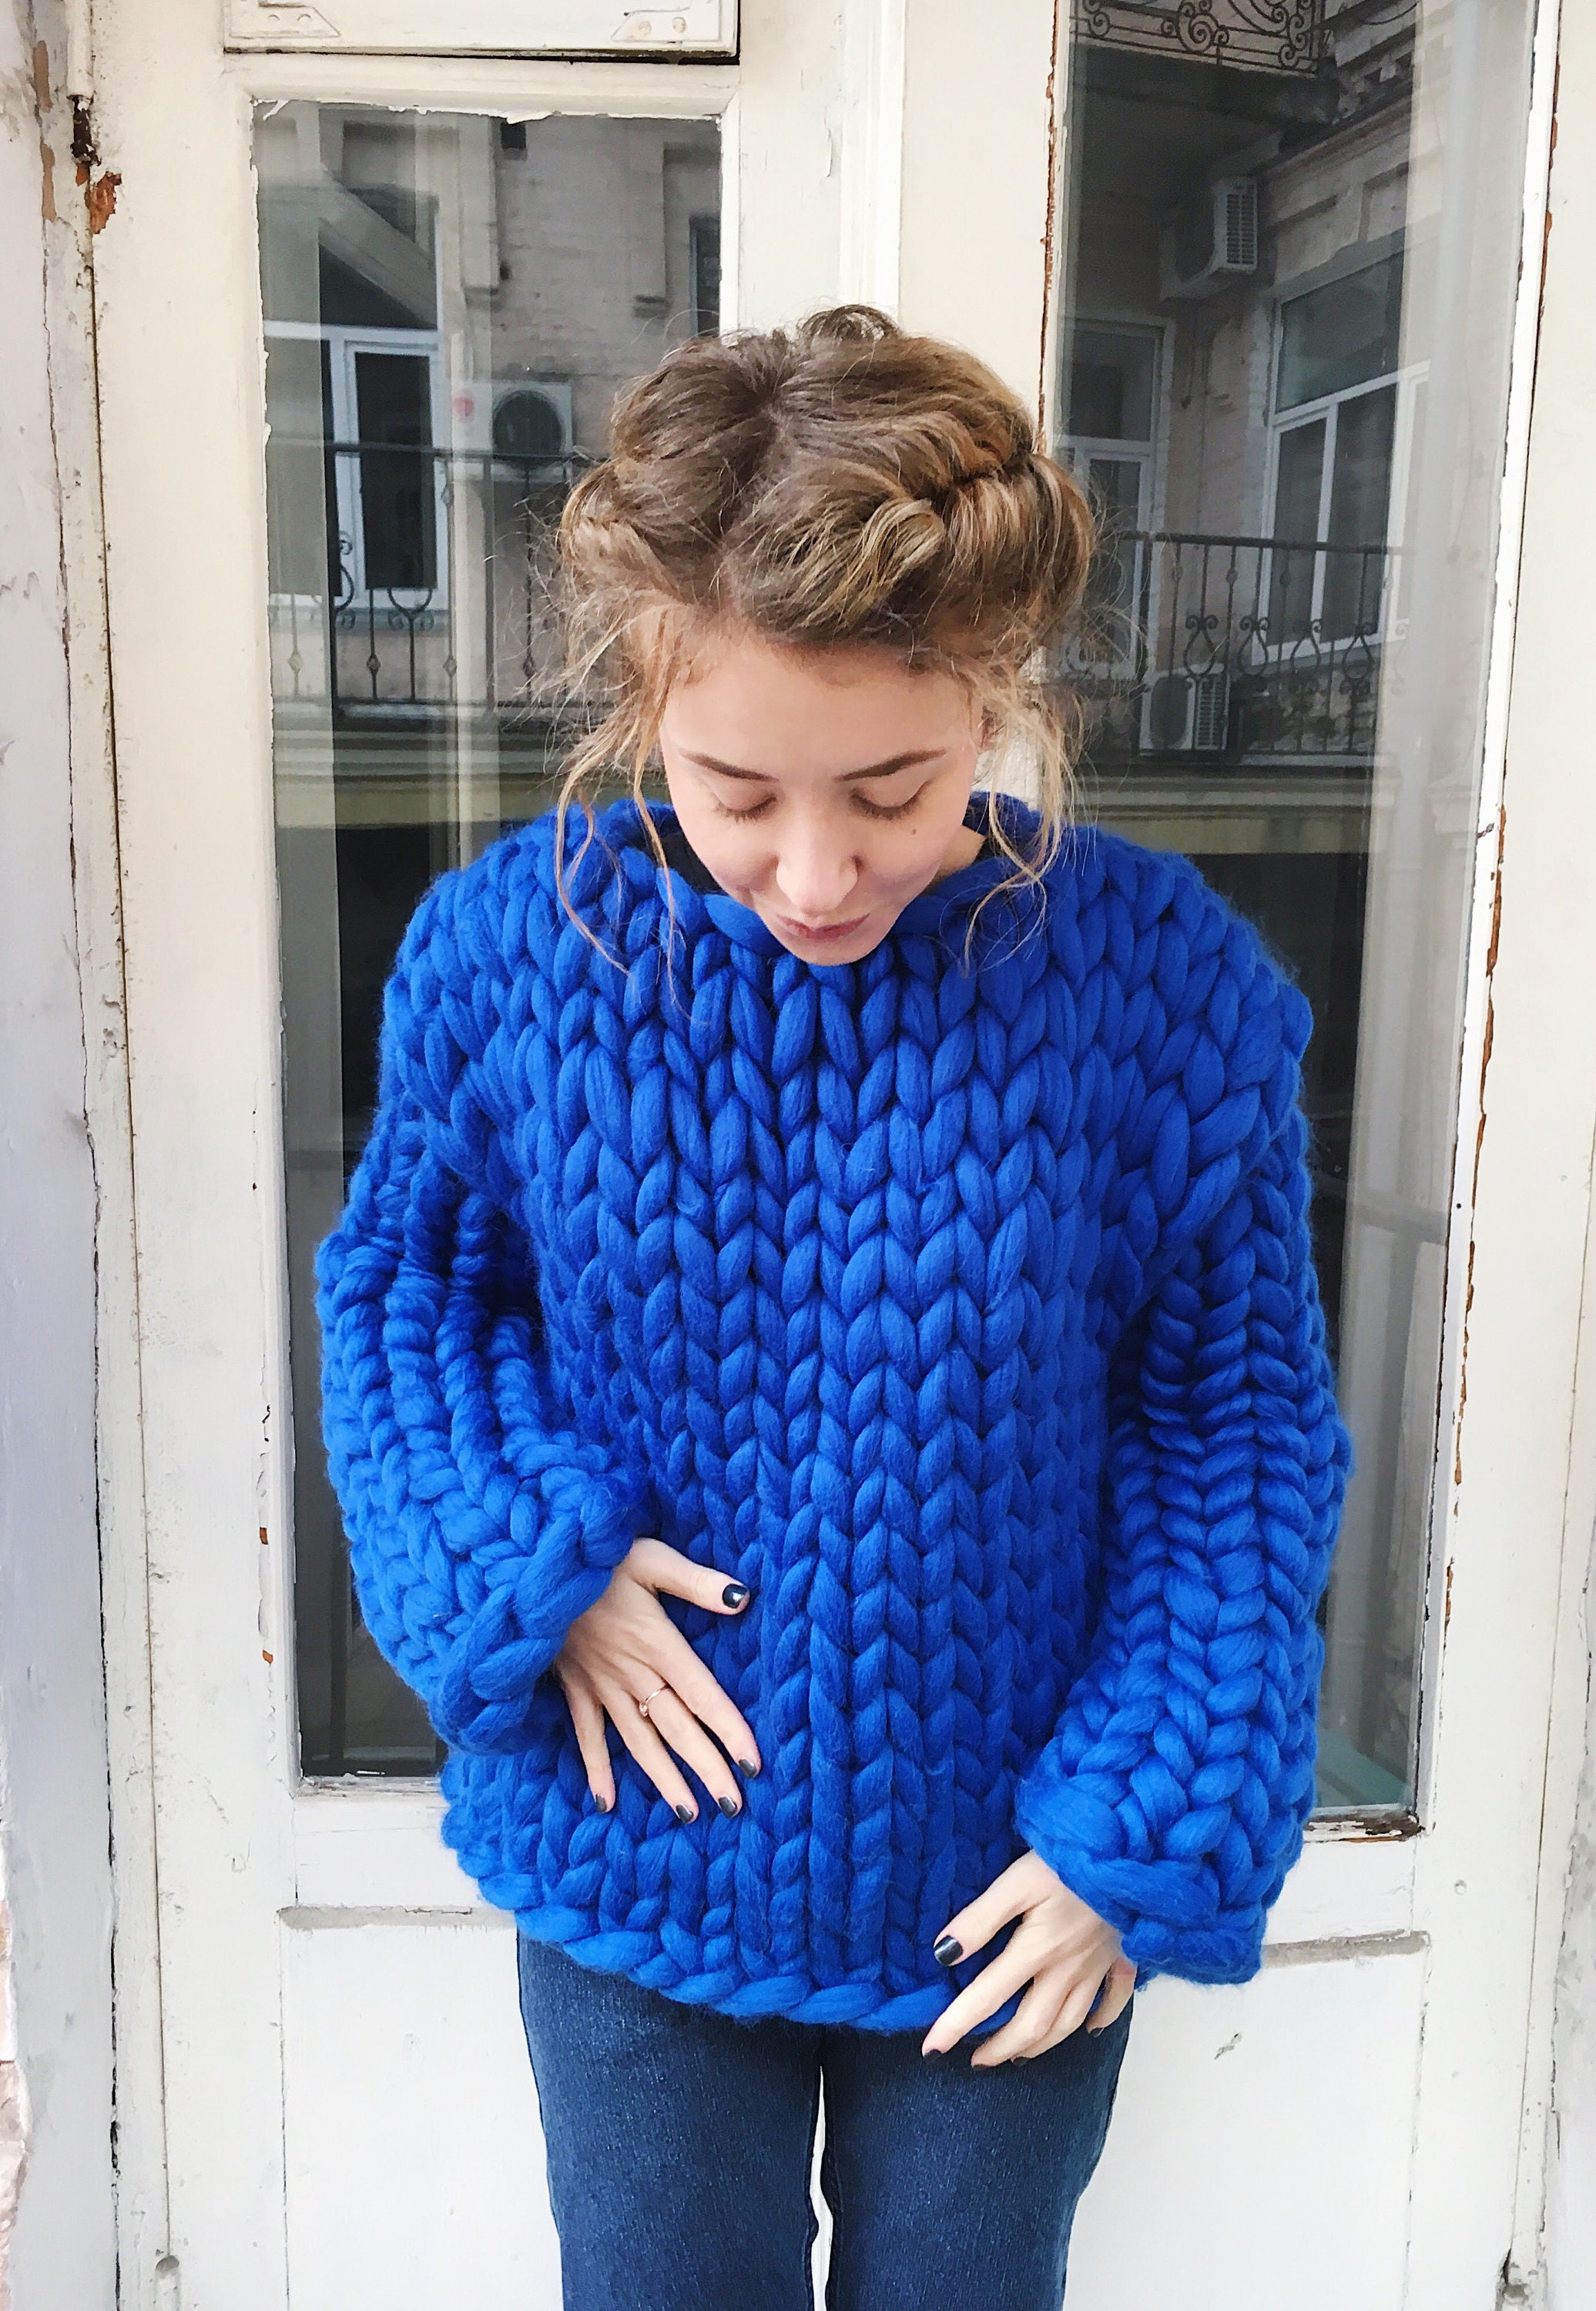 Chunky Knit Sweater, Chunky Knit Sweater, Womens Chunky Knit Sweater, Big Knit  Pullover, Hand Knitted Sweater, Christmas Gift for Her 